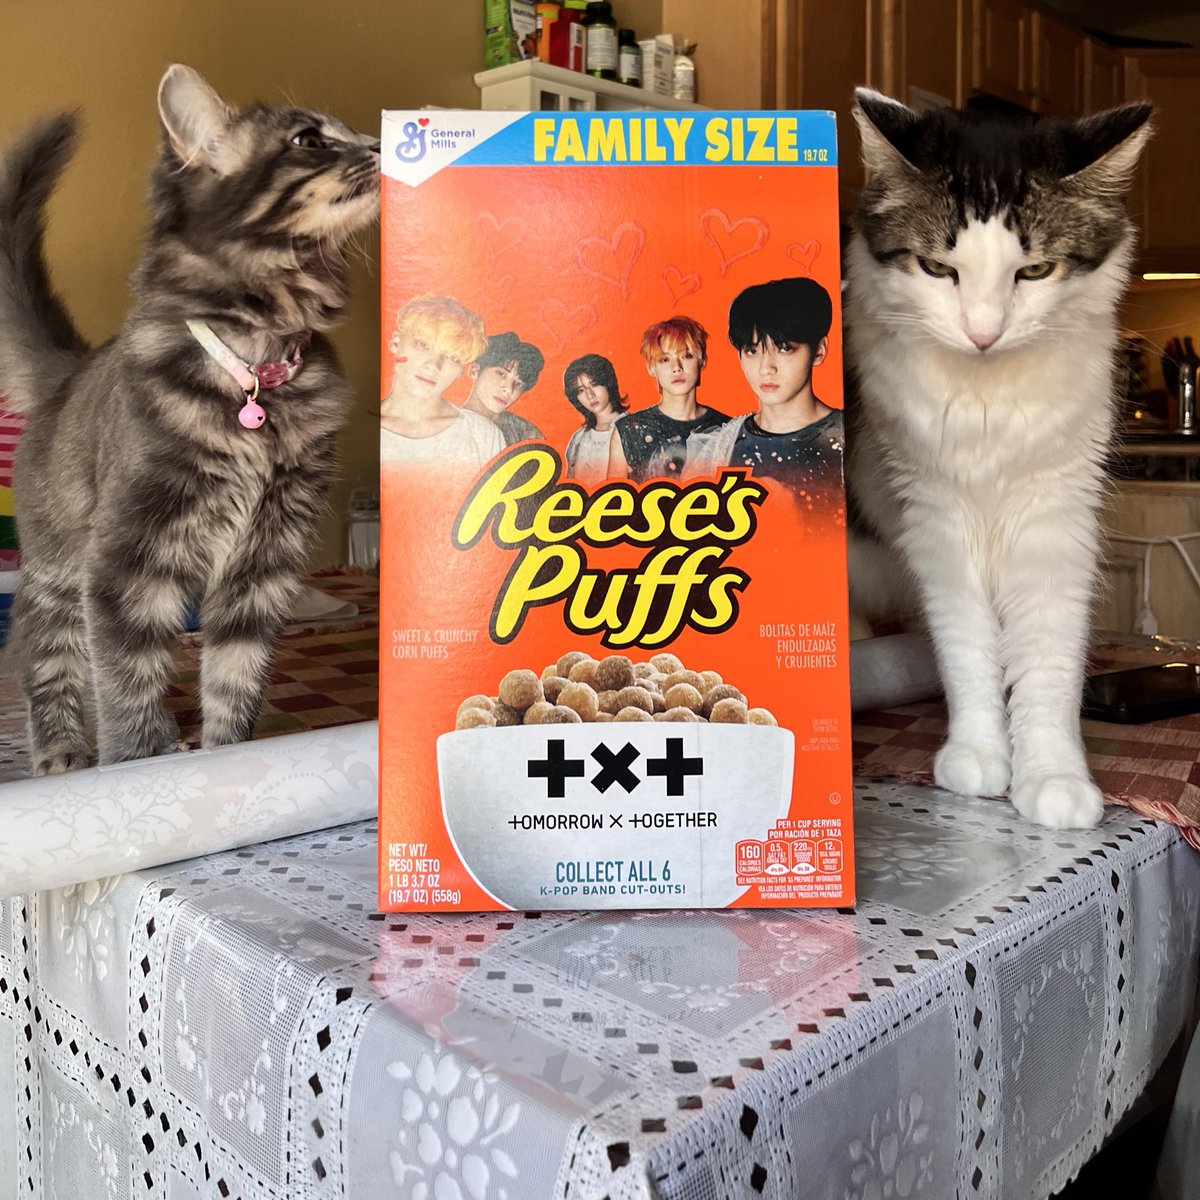 txt cereal is real !! ft my favorite moas leia and kylo 🤭